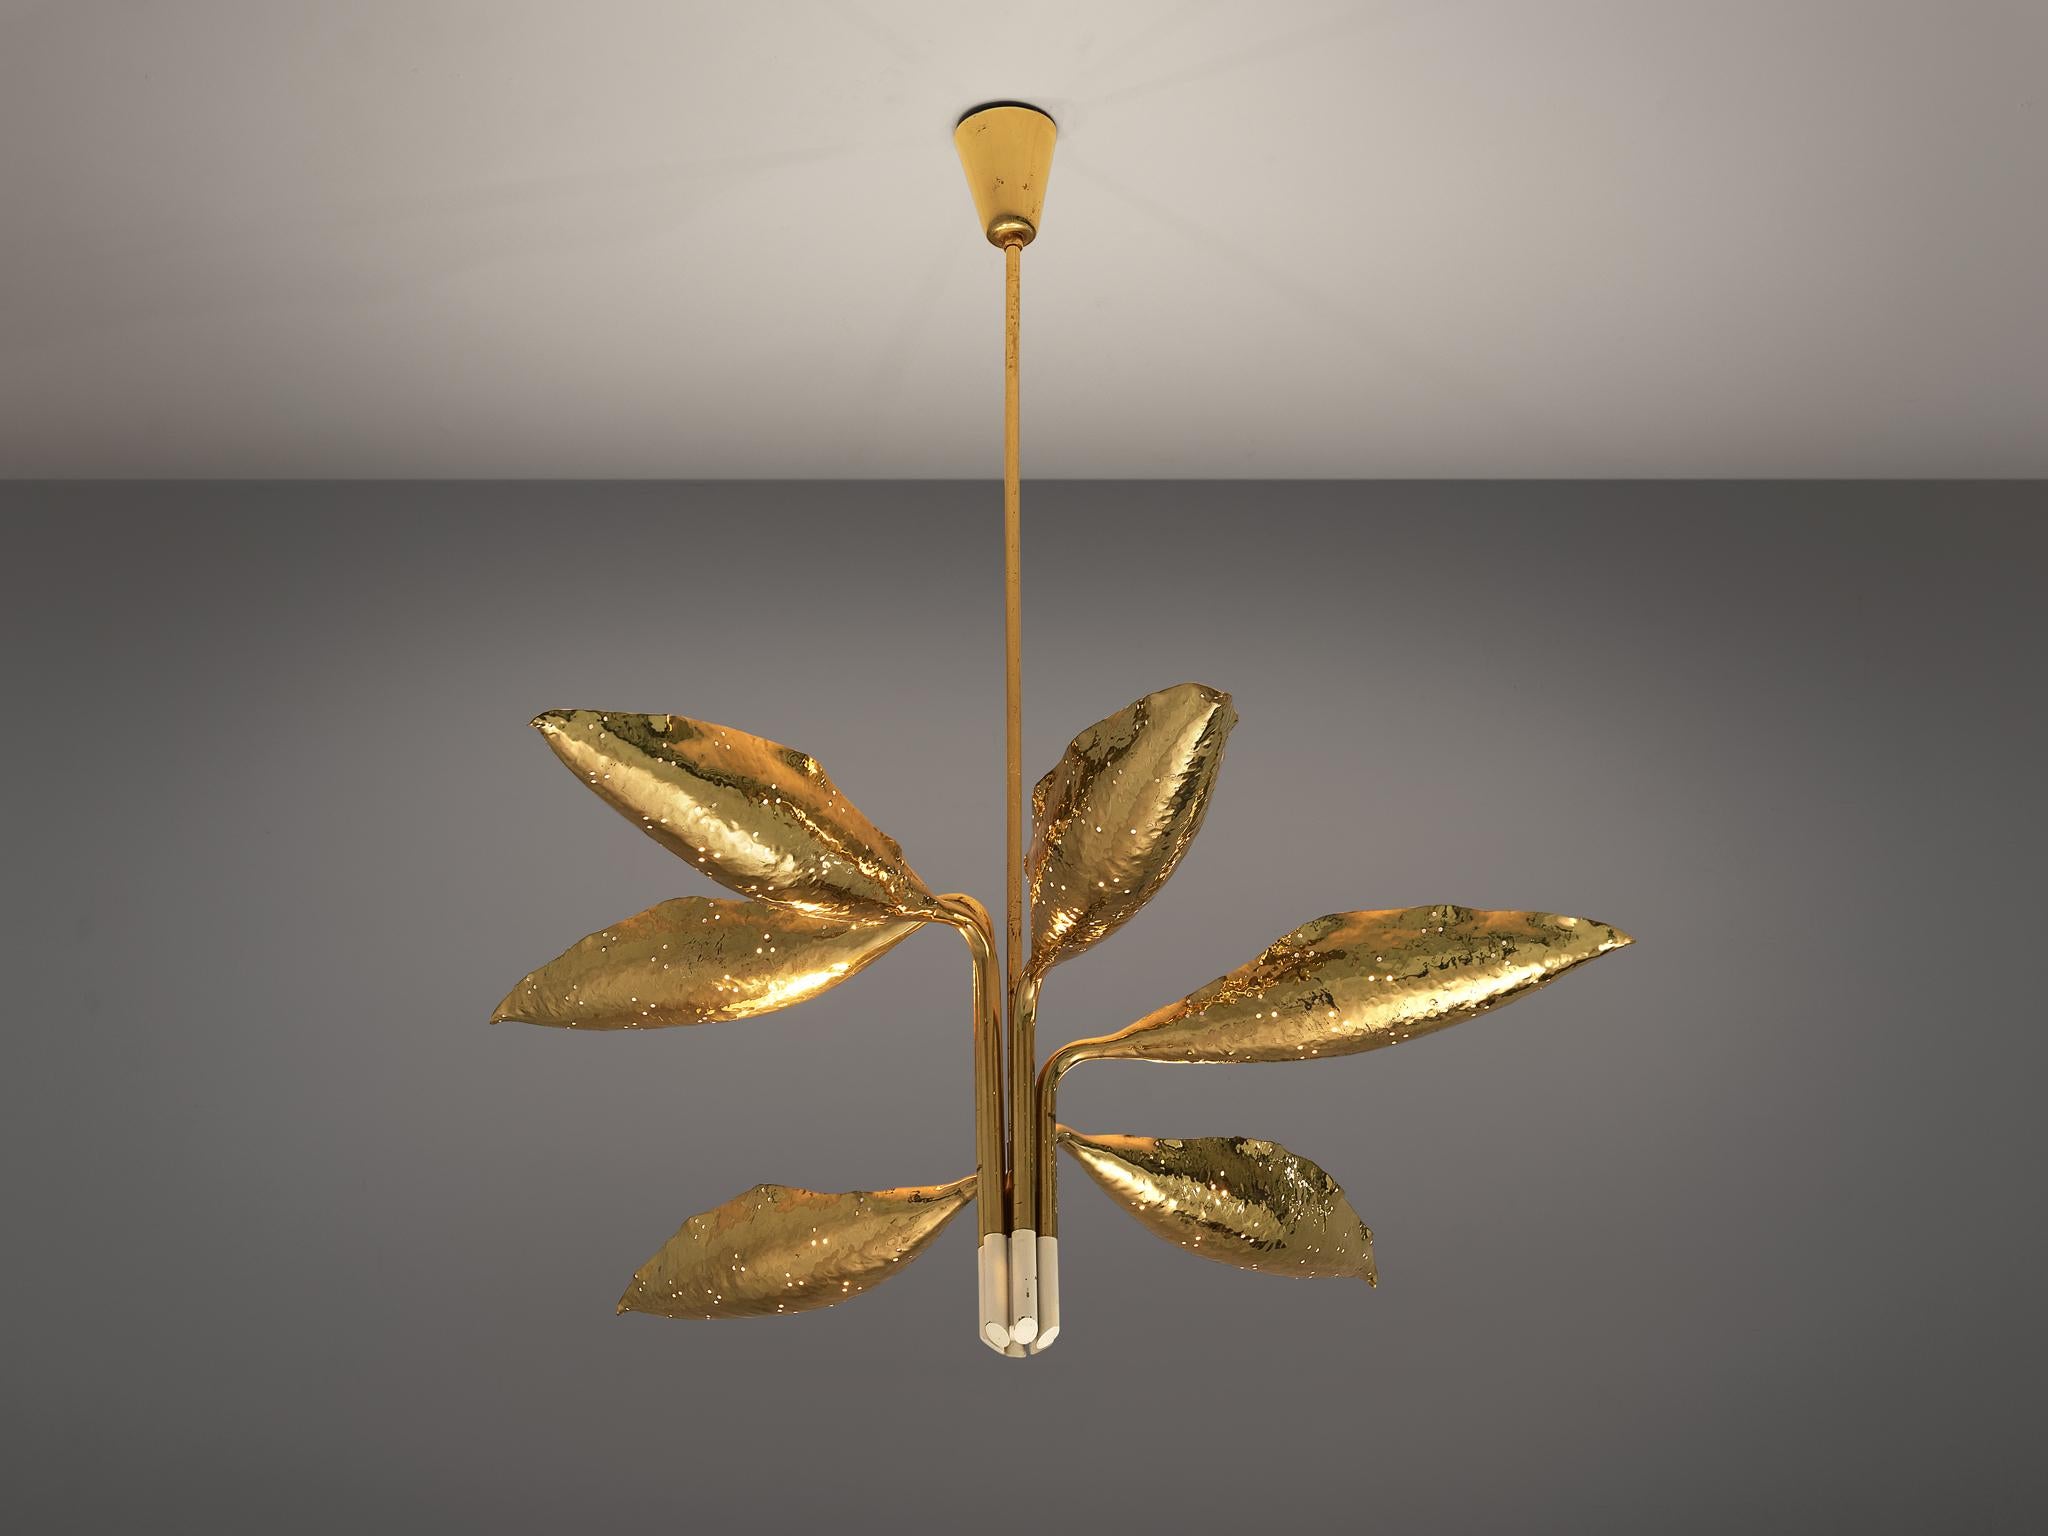 Angelo Lelii for Arredoluce, chandelier model 12369, brass, Italy, circa 1951

Organic chandelier by Angelo Lelii designed for Arredoluce. Six leaves open towards the ceiling and surround the lightbulbs. The hammered, perforated brass has a vivid